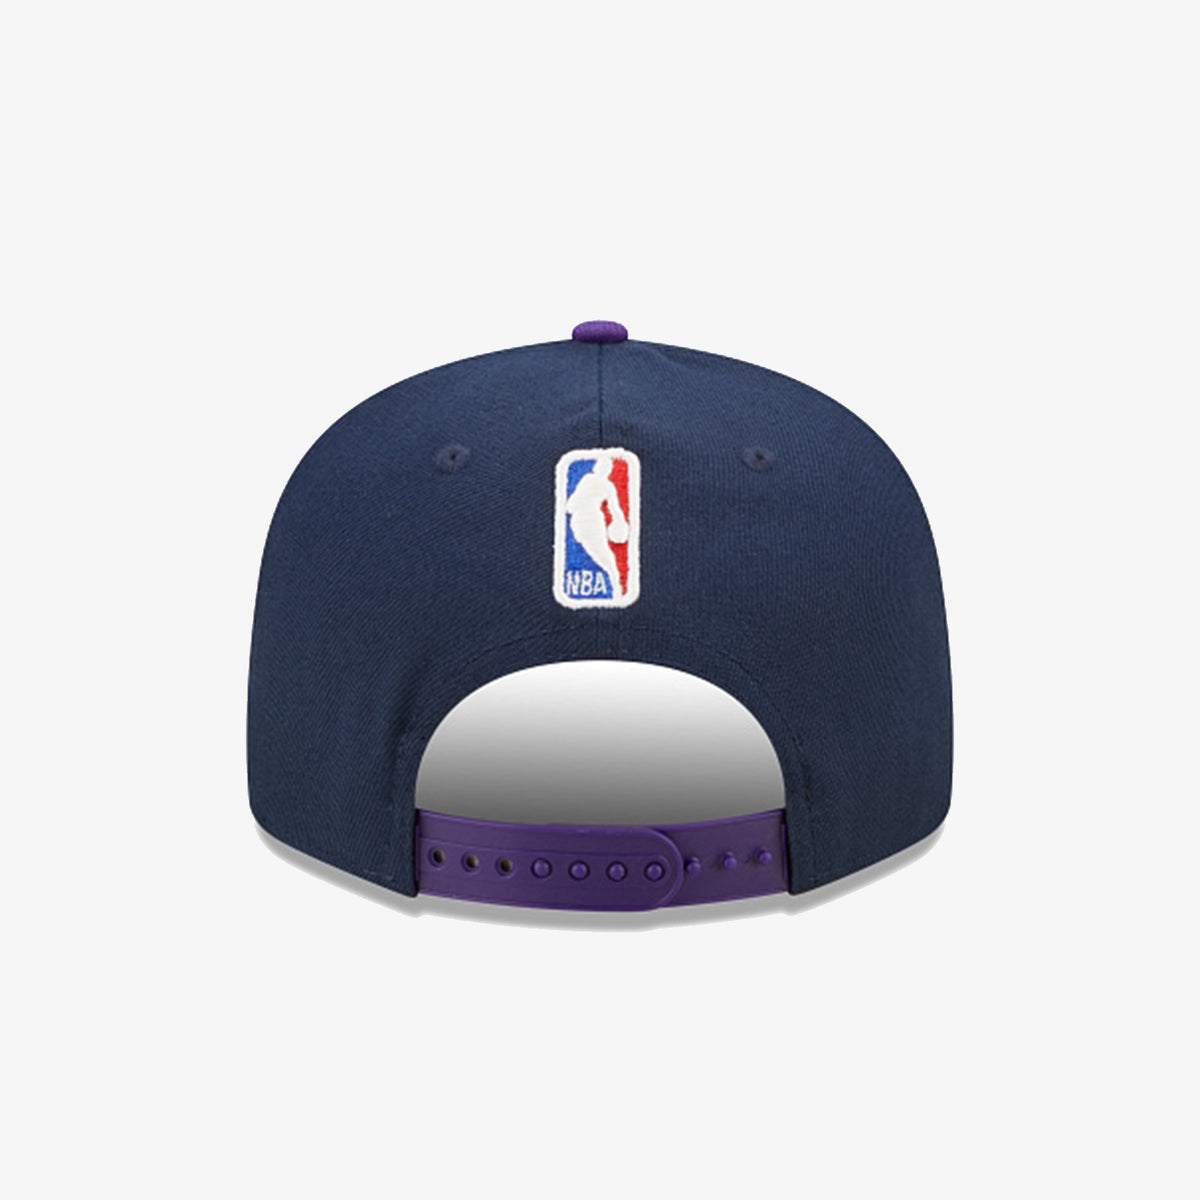 New Orleans Pelicans 9Fifty City Edition Snapback